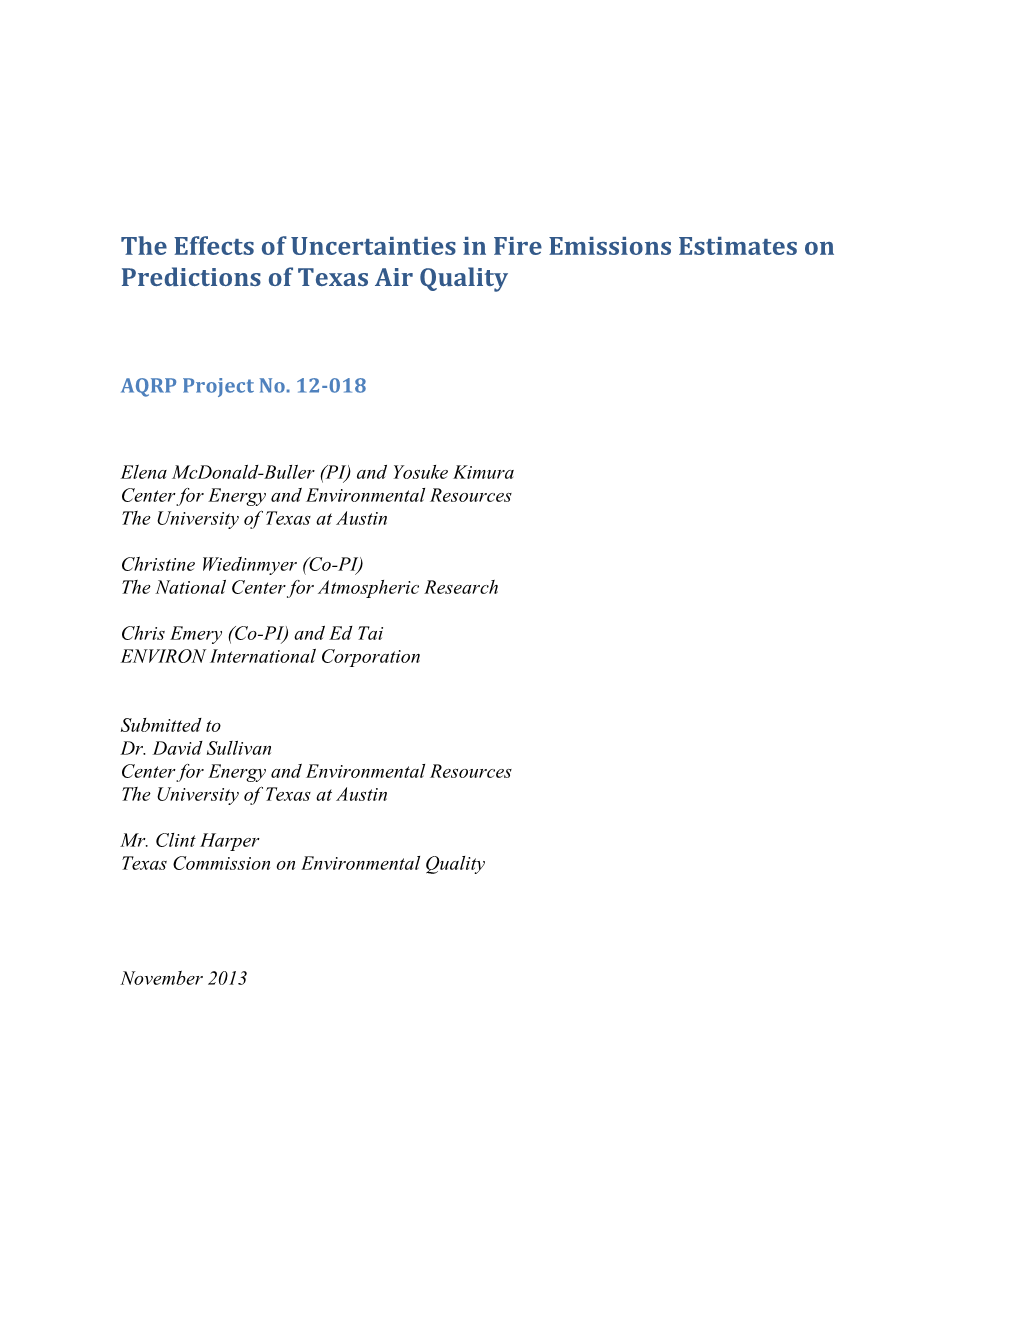 The Effects of Uncertainties in Fire Emissions Estimates on Predictions of Texas Air Quality